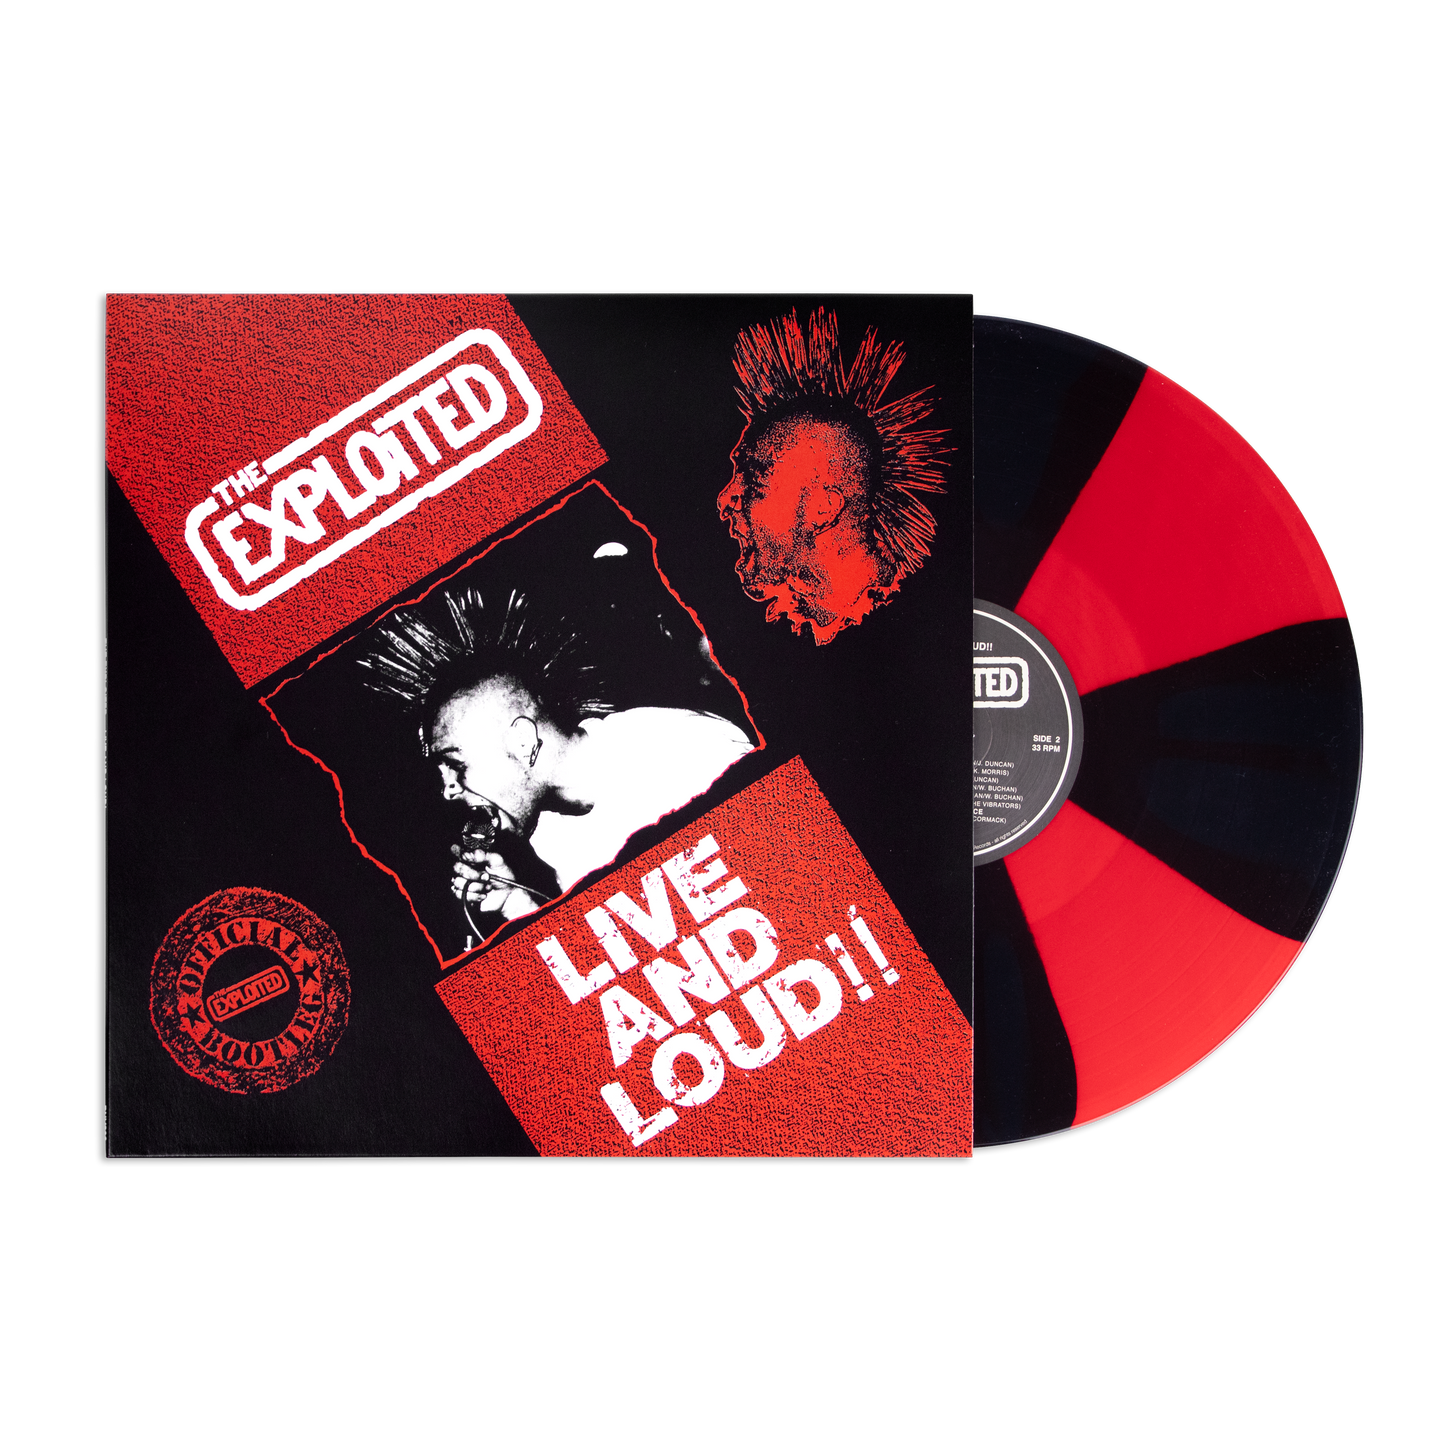 The Exploited - Live and Loud 12” Vinyl